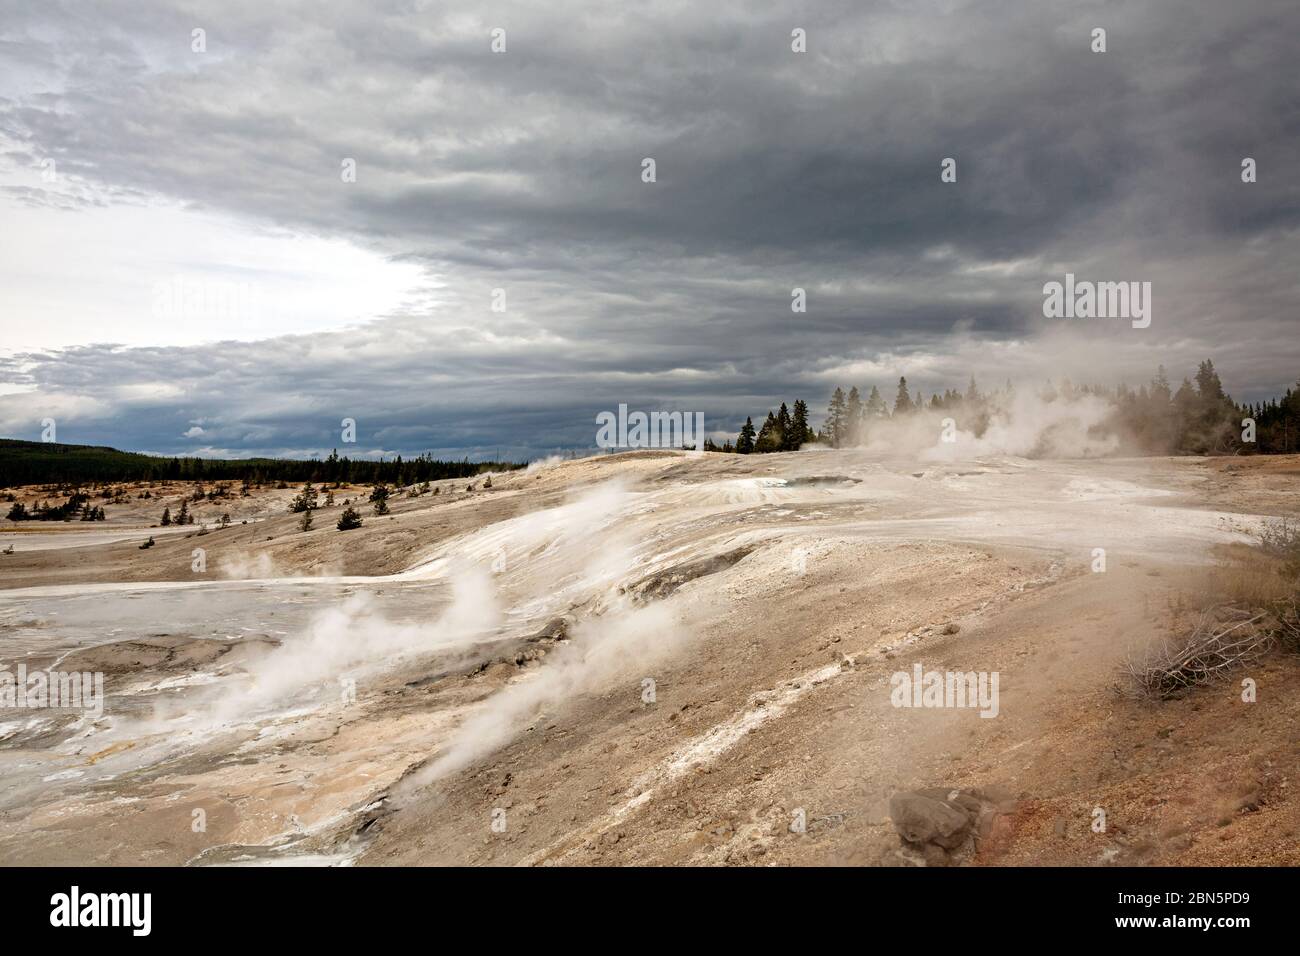 WY04272-00...WYOMING - Steaming Porcelain Springs at Norris Geyser Basin in Yellowstone National Park/ Stock Photo